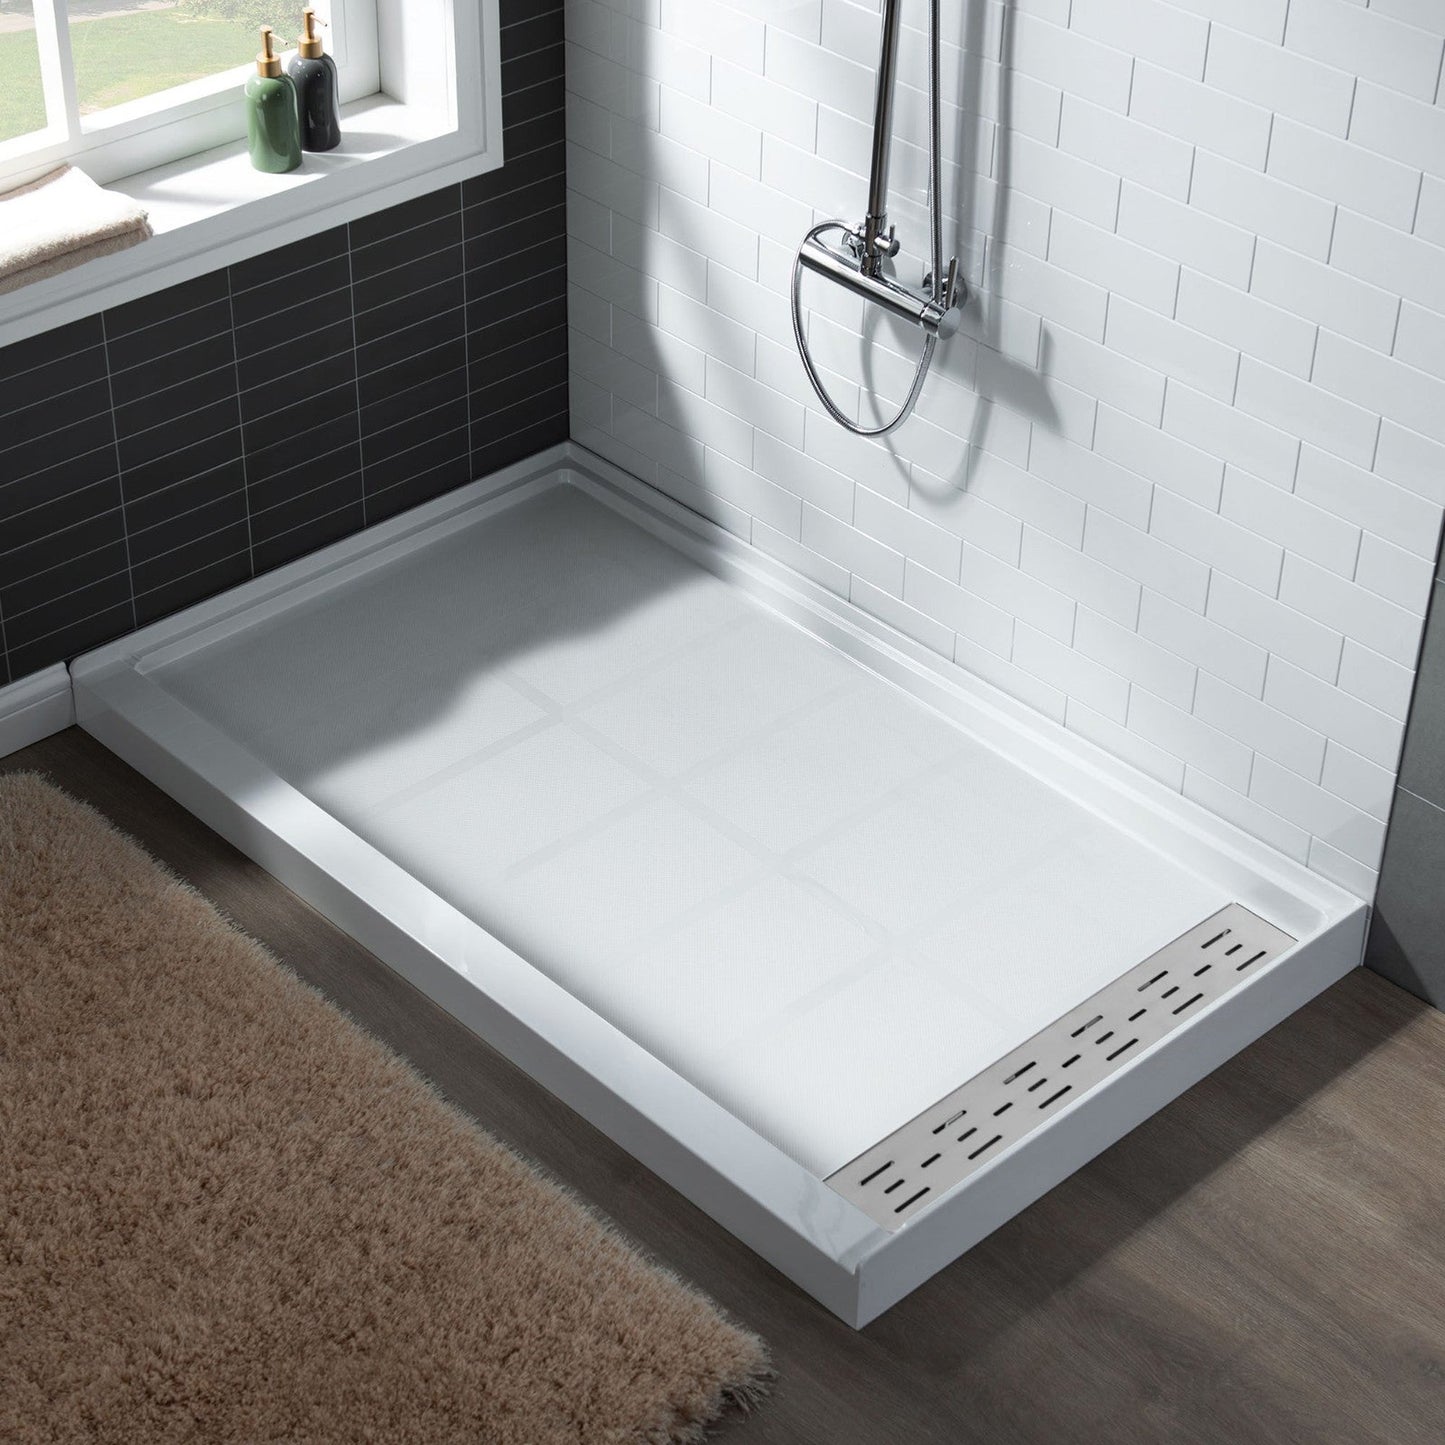 WoodBridge 60" x 36" White Solid Surface Shower Base Right Drain Location With Brushed Nickel Trench Drain Cover